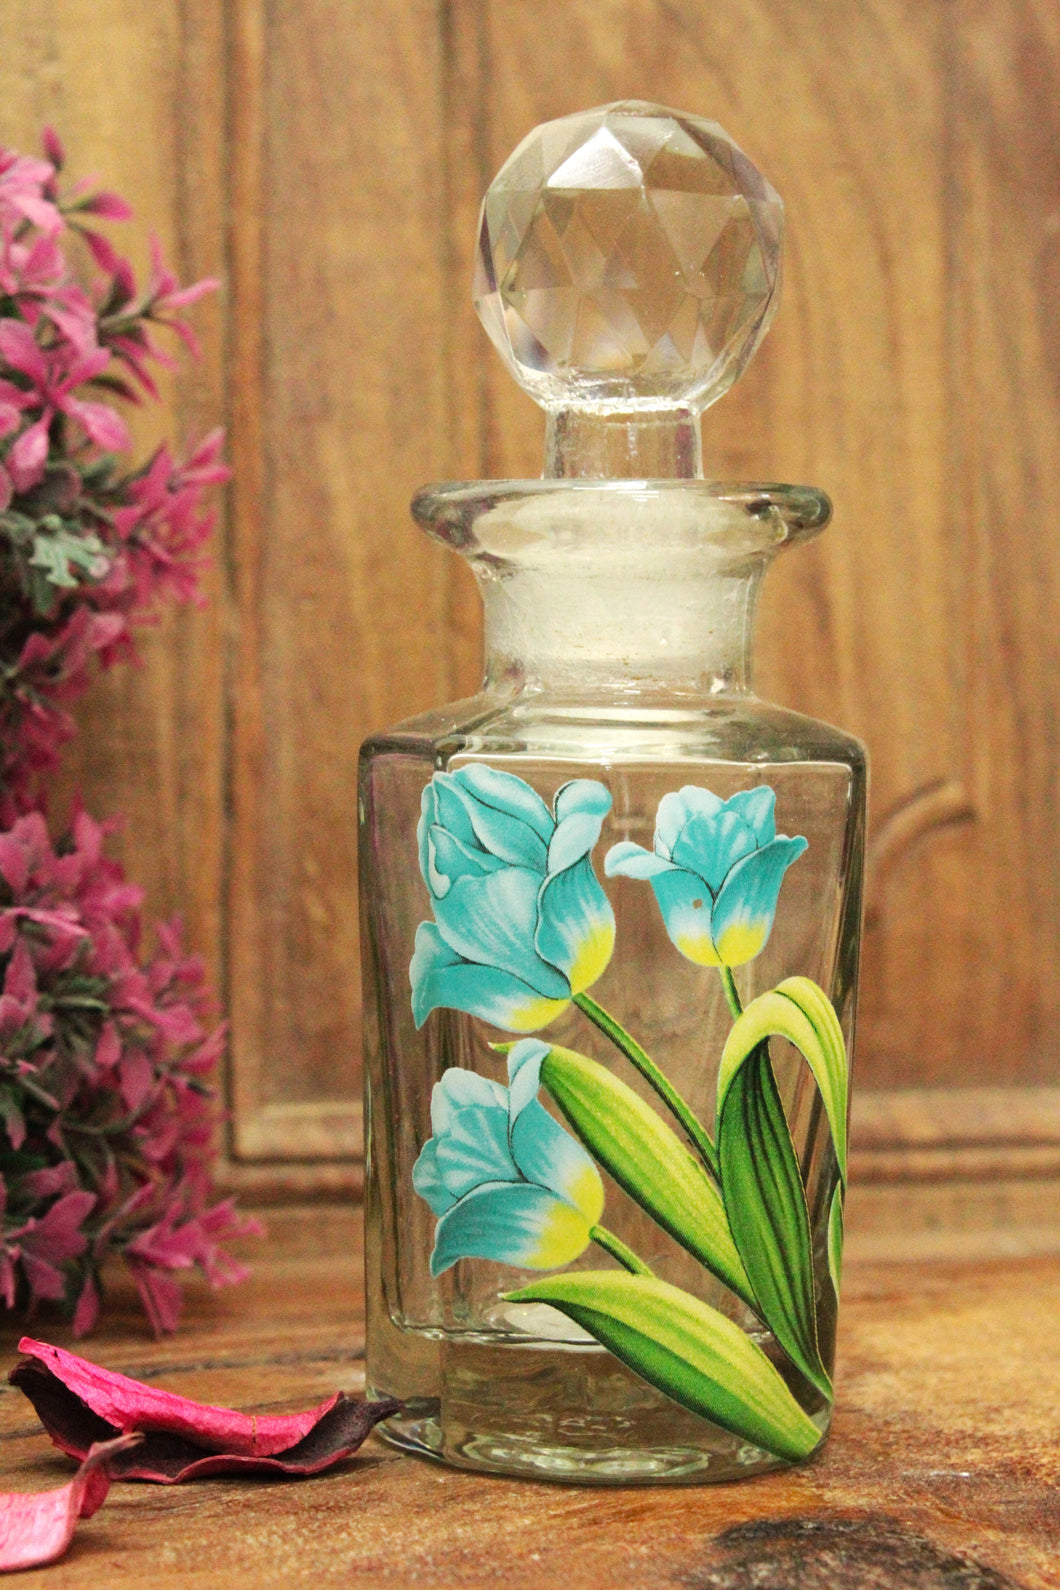 Elegance Embodied: Glass Attar/Perfume Bottle Collection